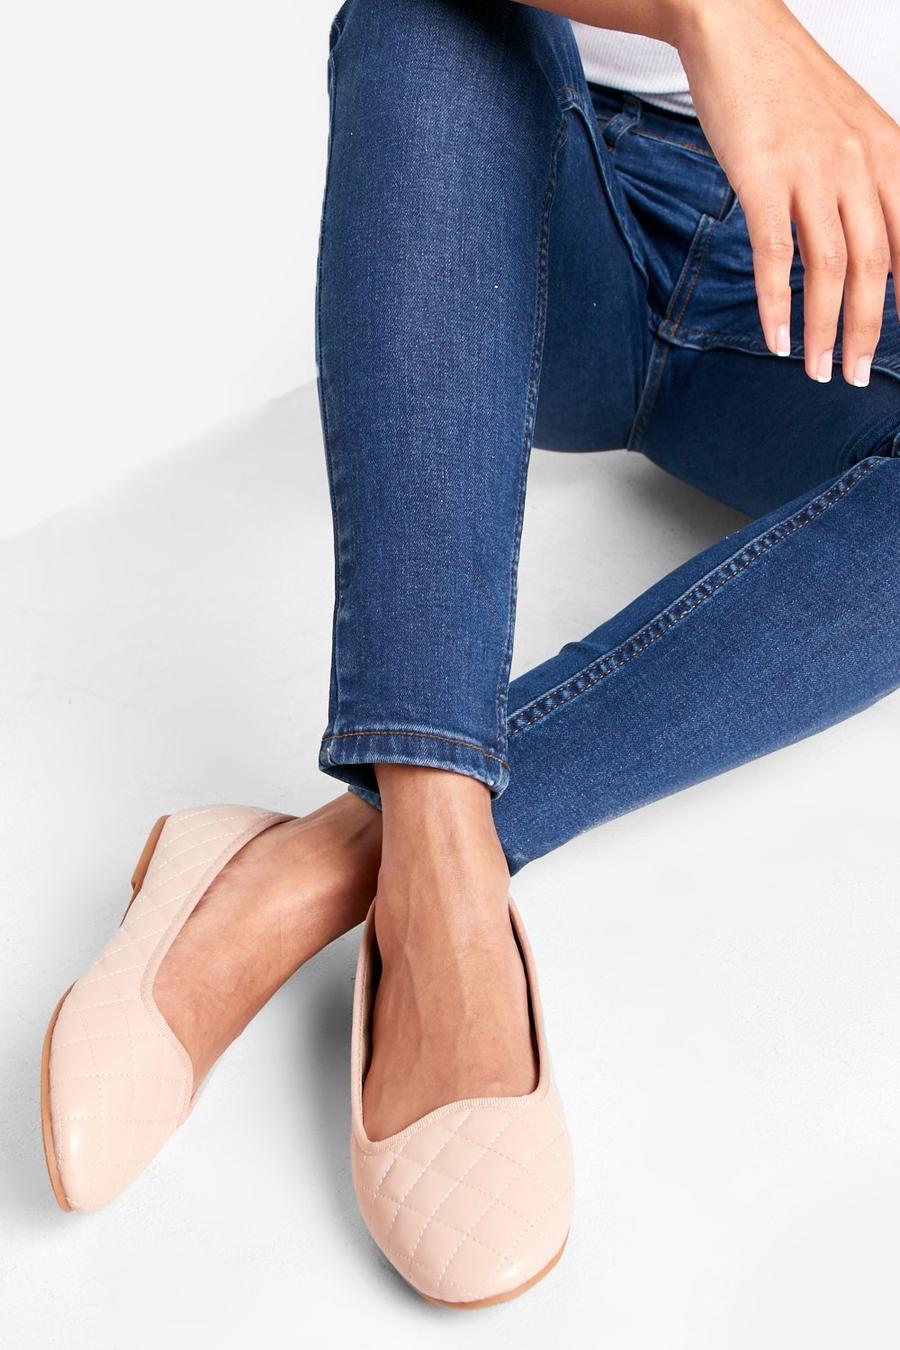 Nude Quilted Slipper Ballet Pump